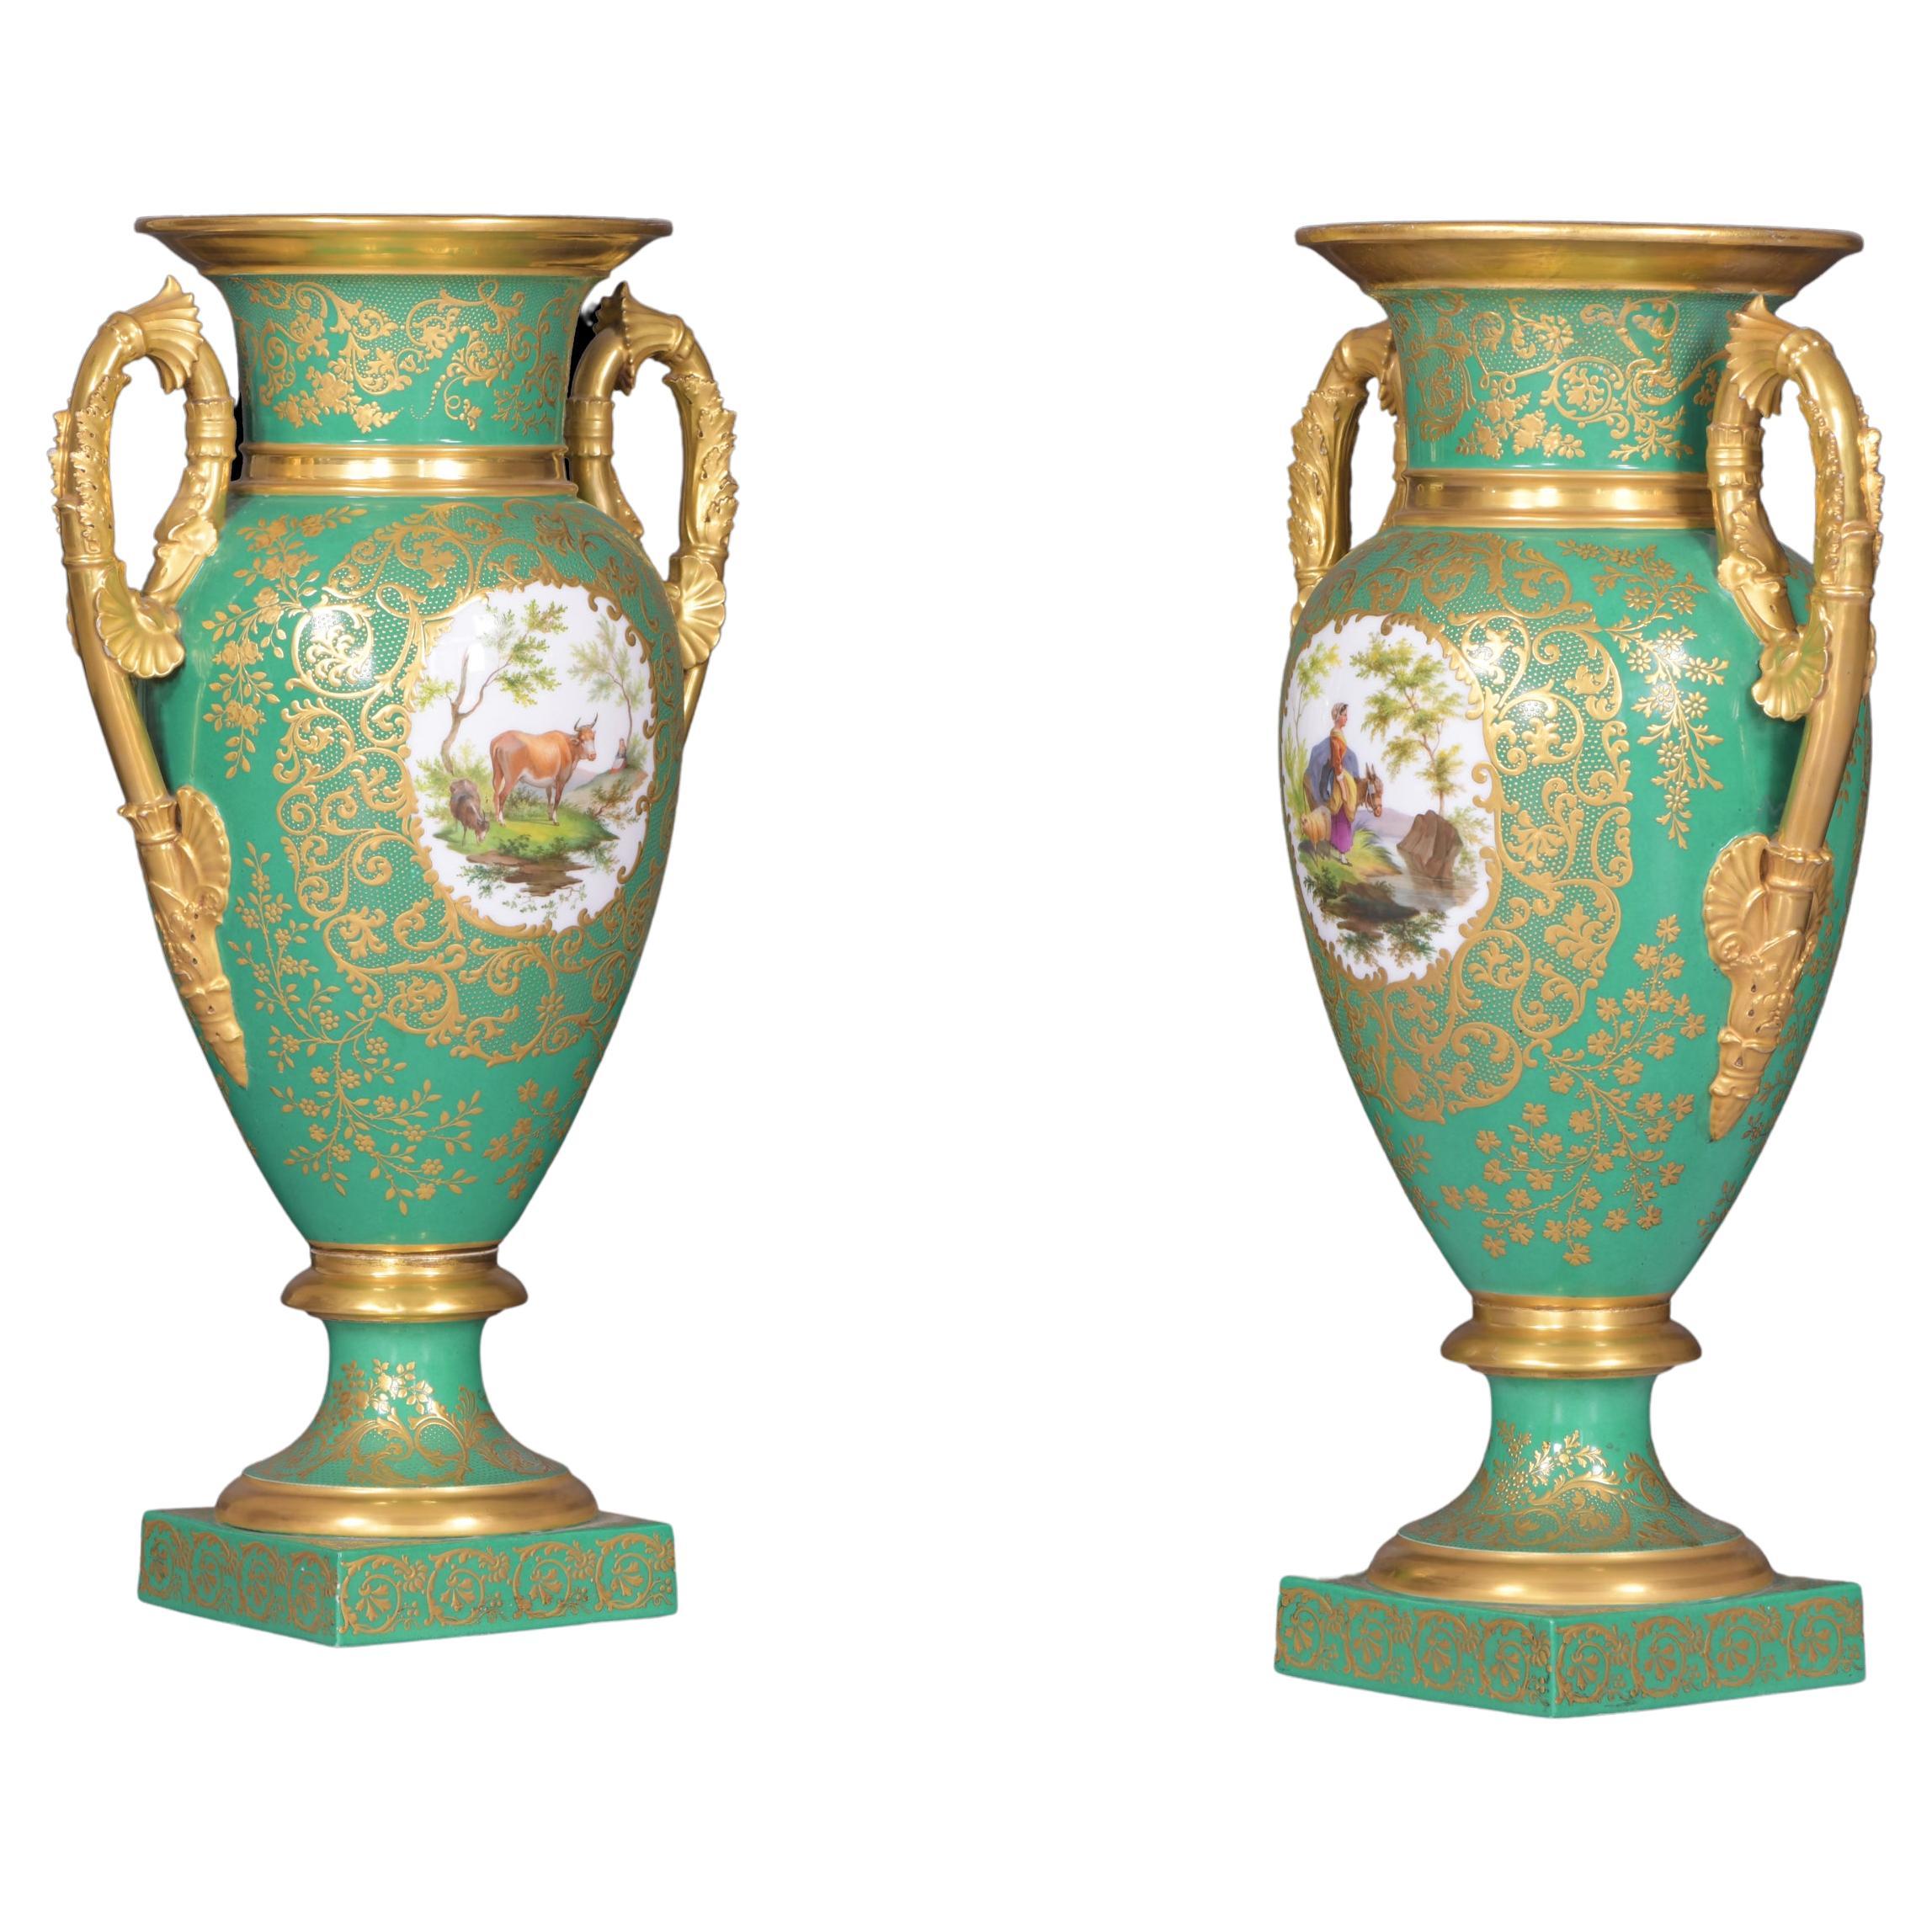 Pair of 19th Century French Parisian Vases For Sale